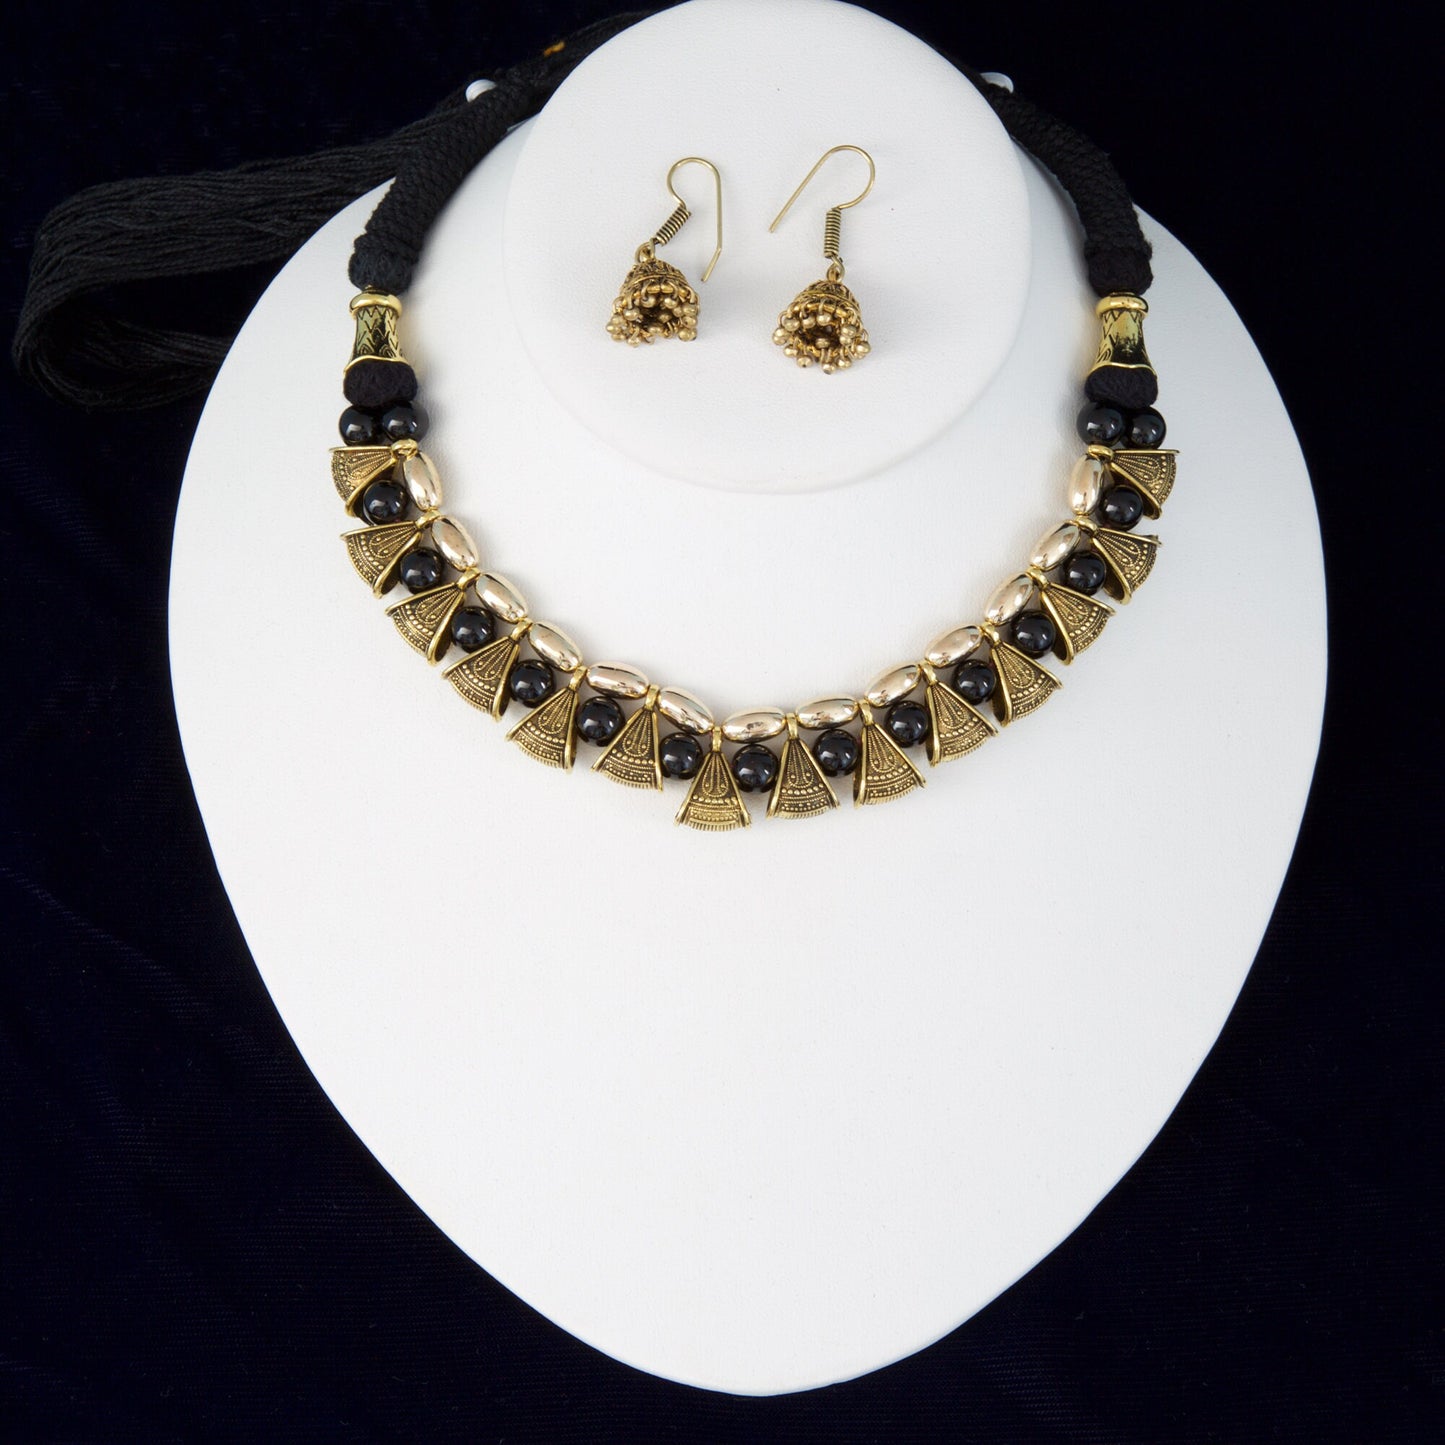 Silk thread necklace and earrings set handmade Fashion Jewelry for Womens and Girls